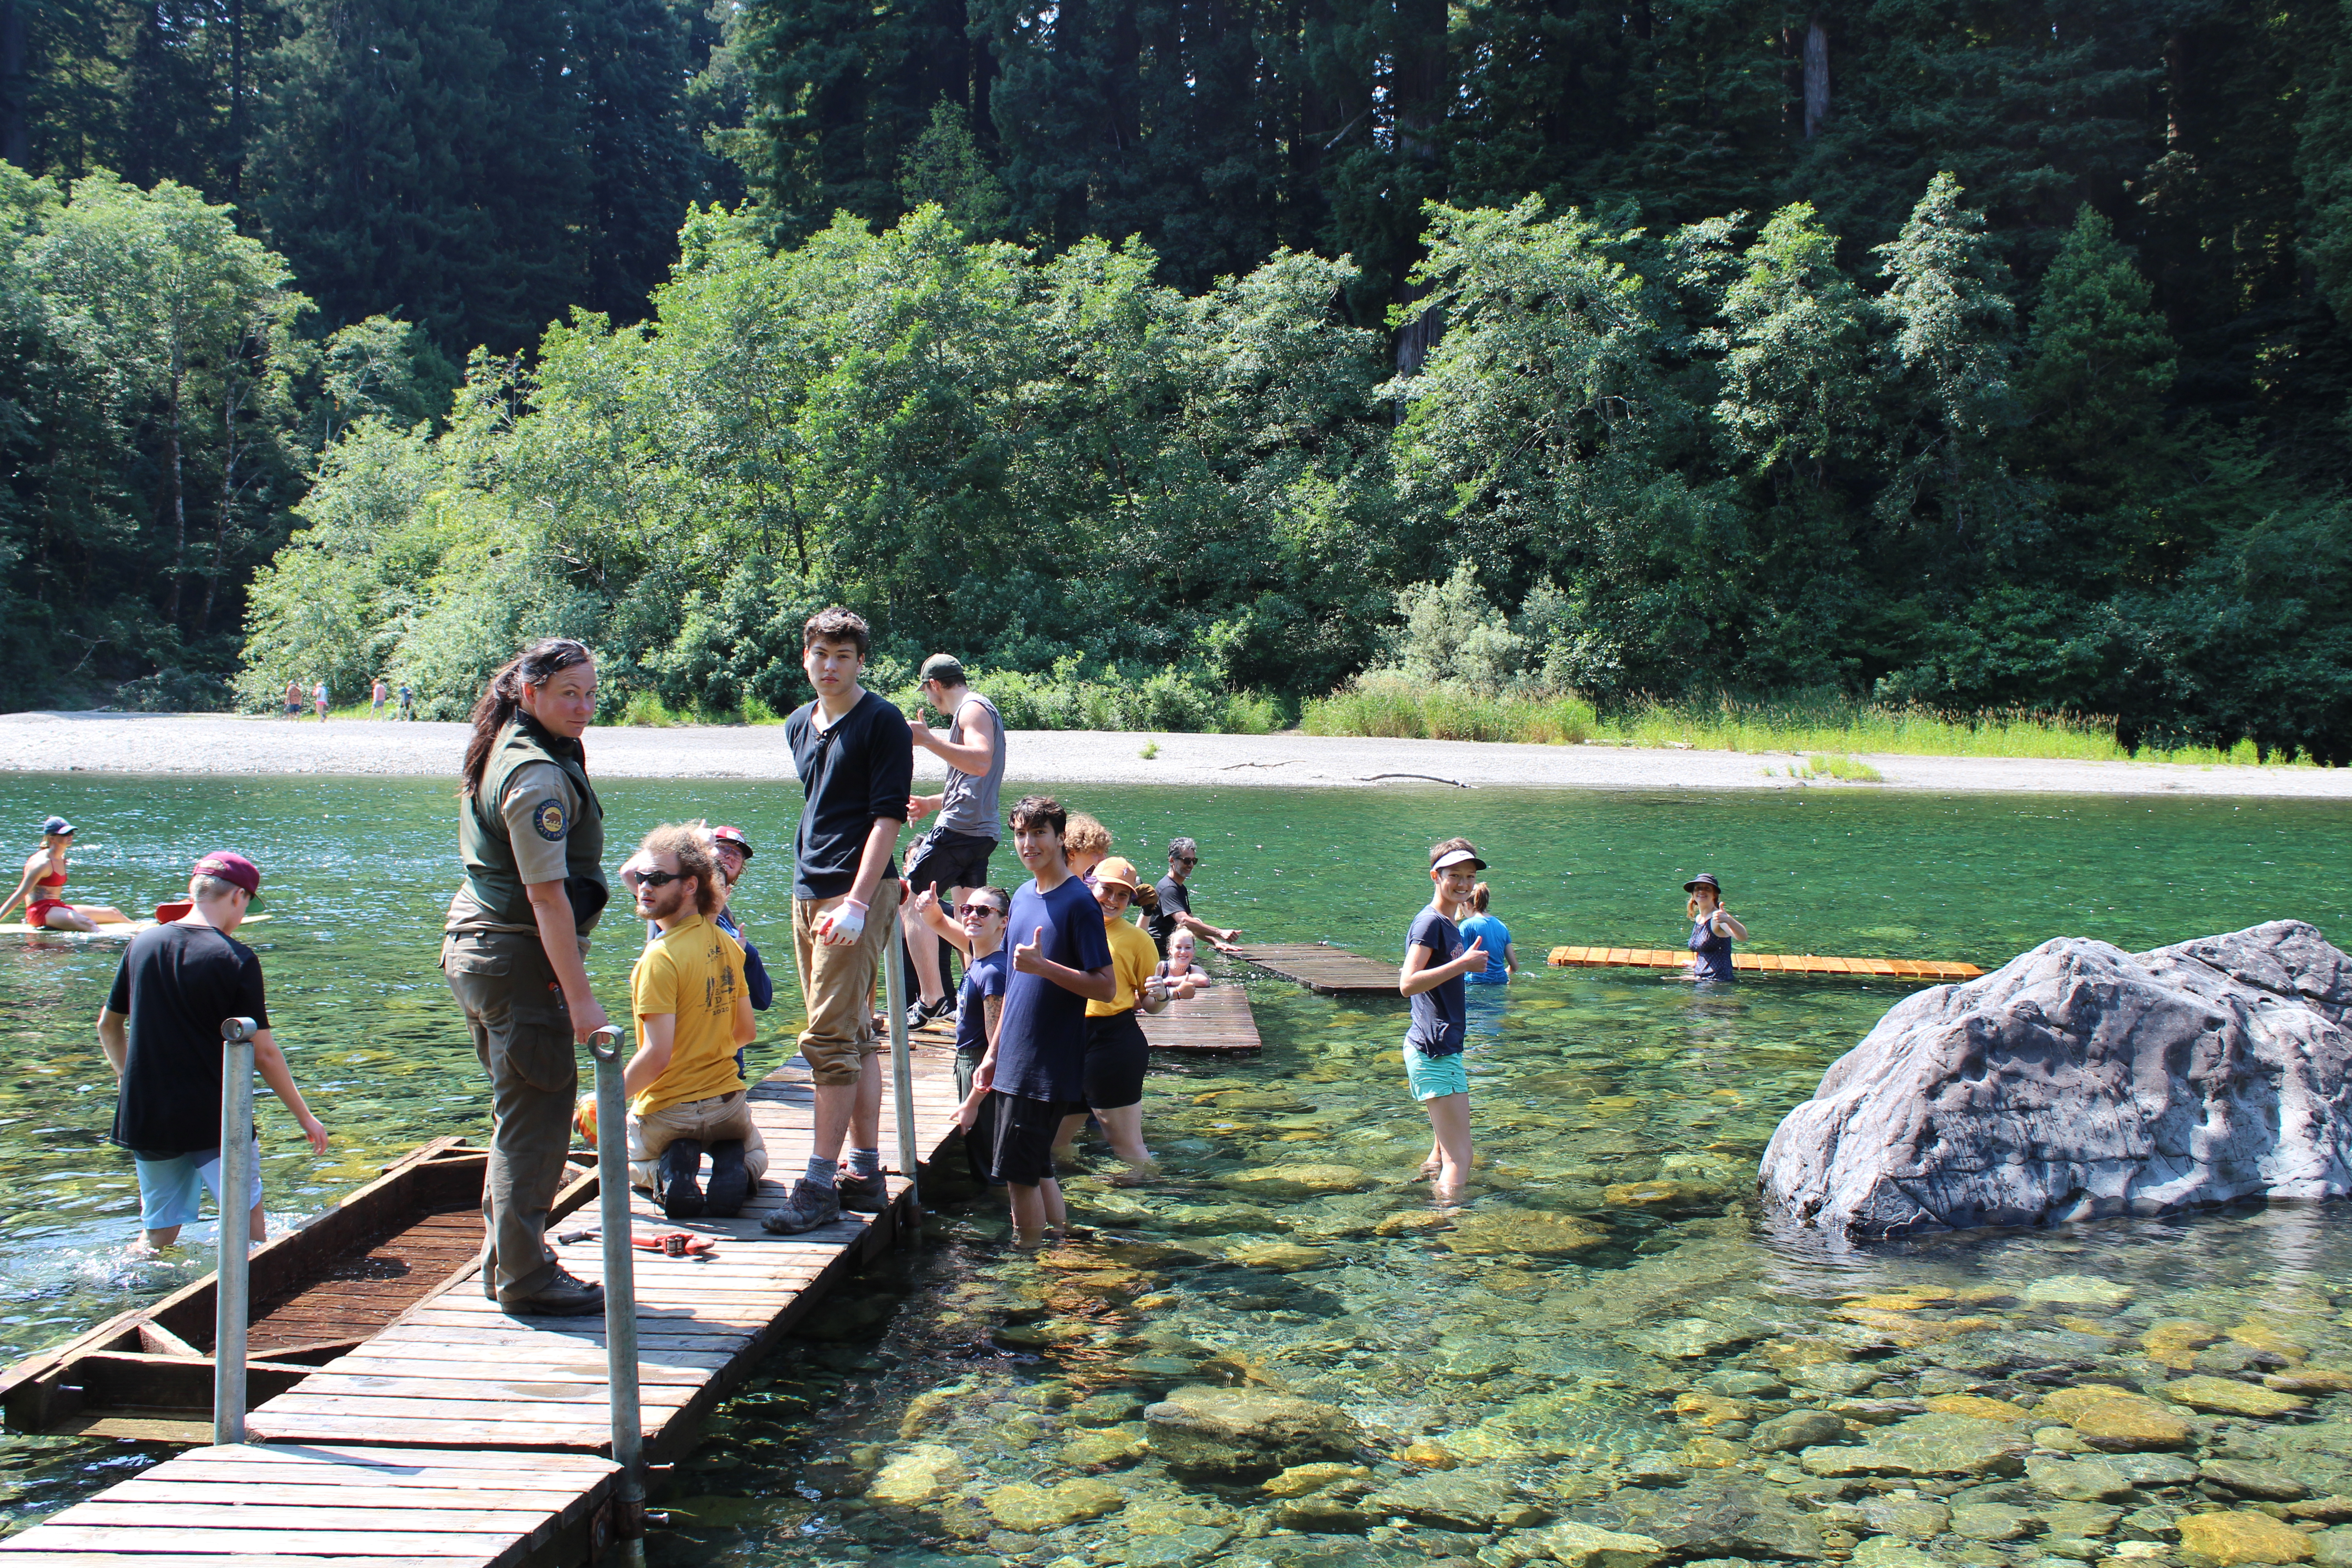 With the help of Redwood National & State Parks, SSP volunteers install a seasonal foot bridge across the Smith River.